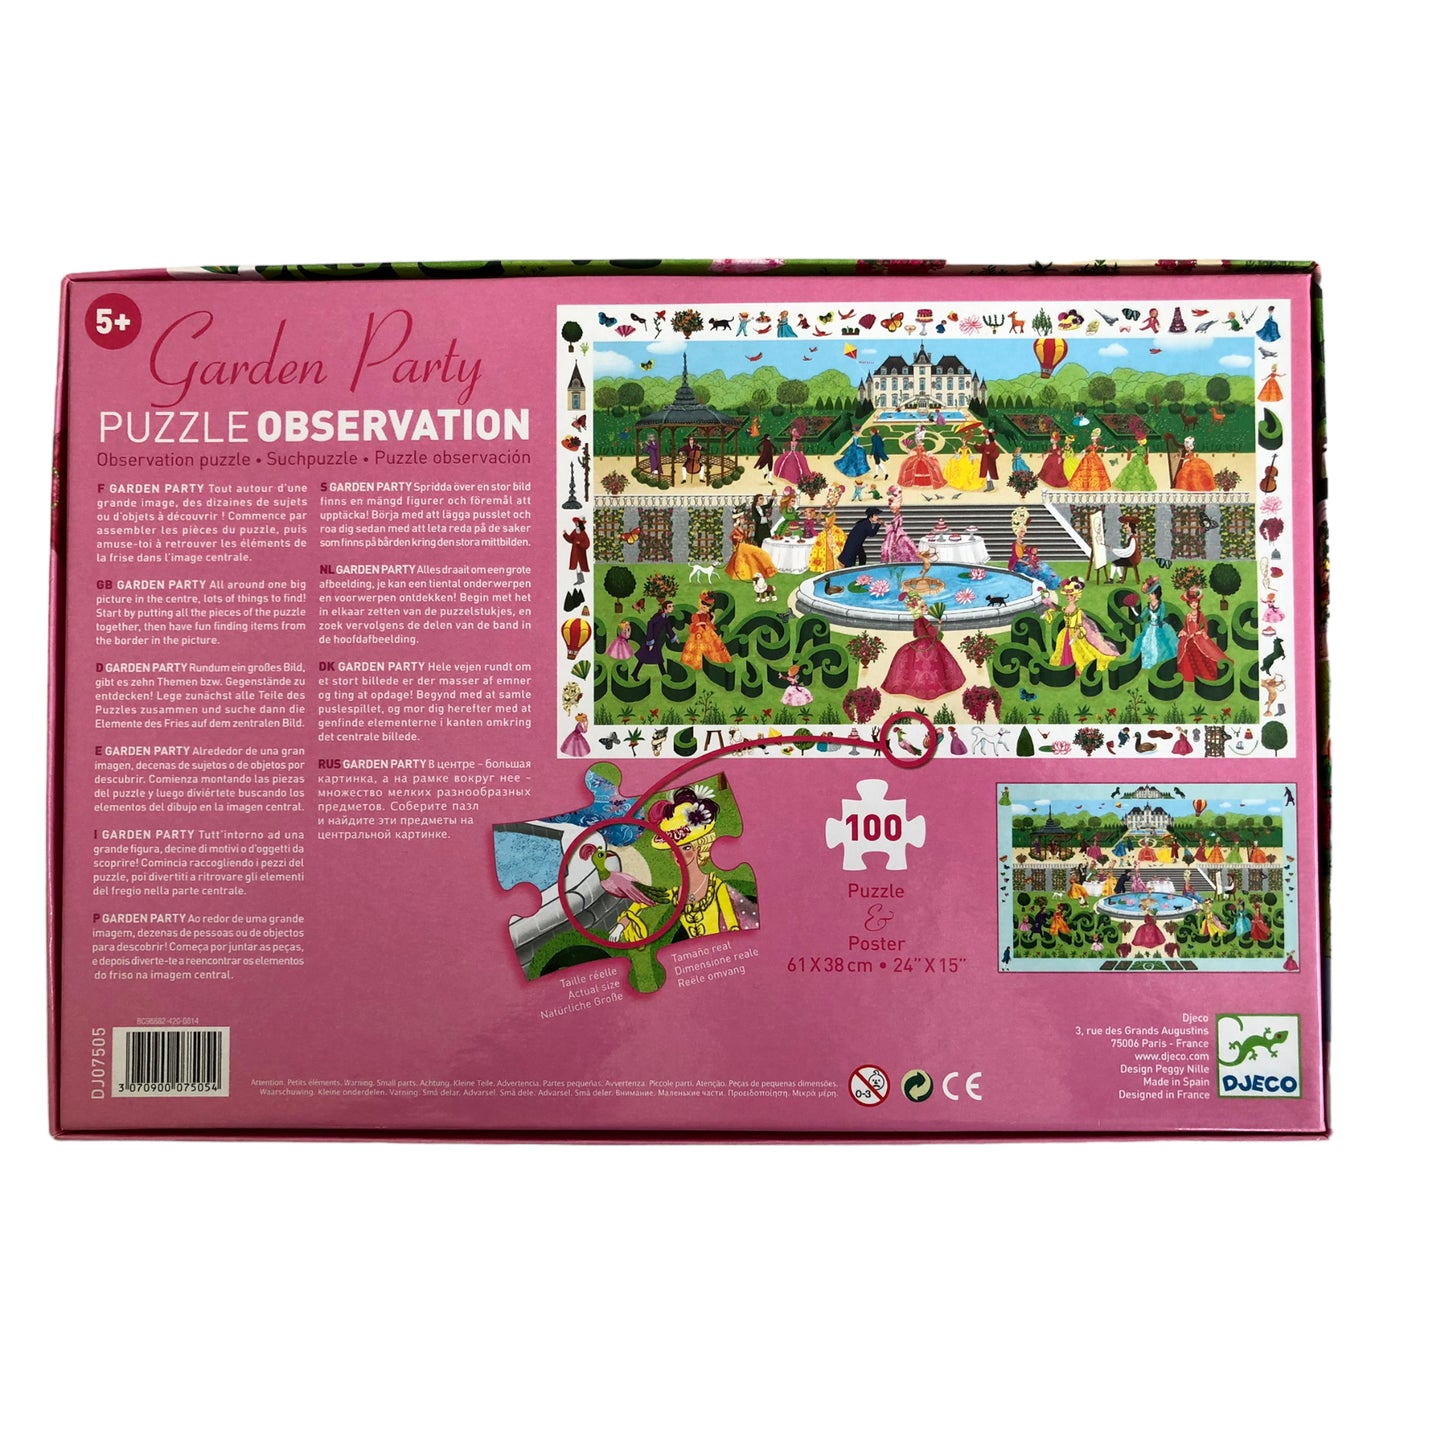 Djeco - "Garden Party" Puzzle Observation & Poster - 100 Pieces